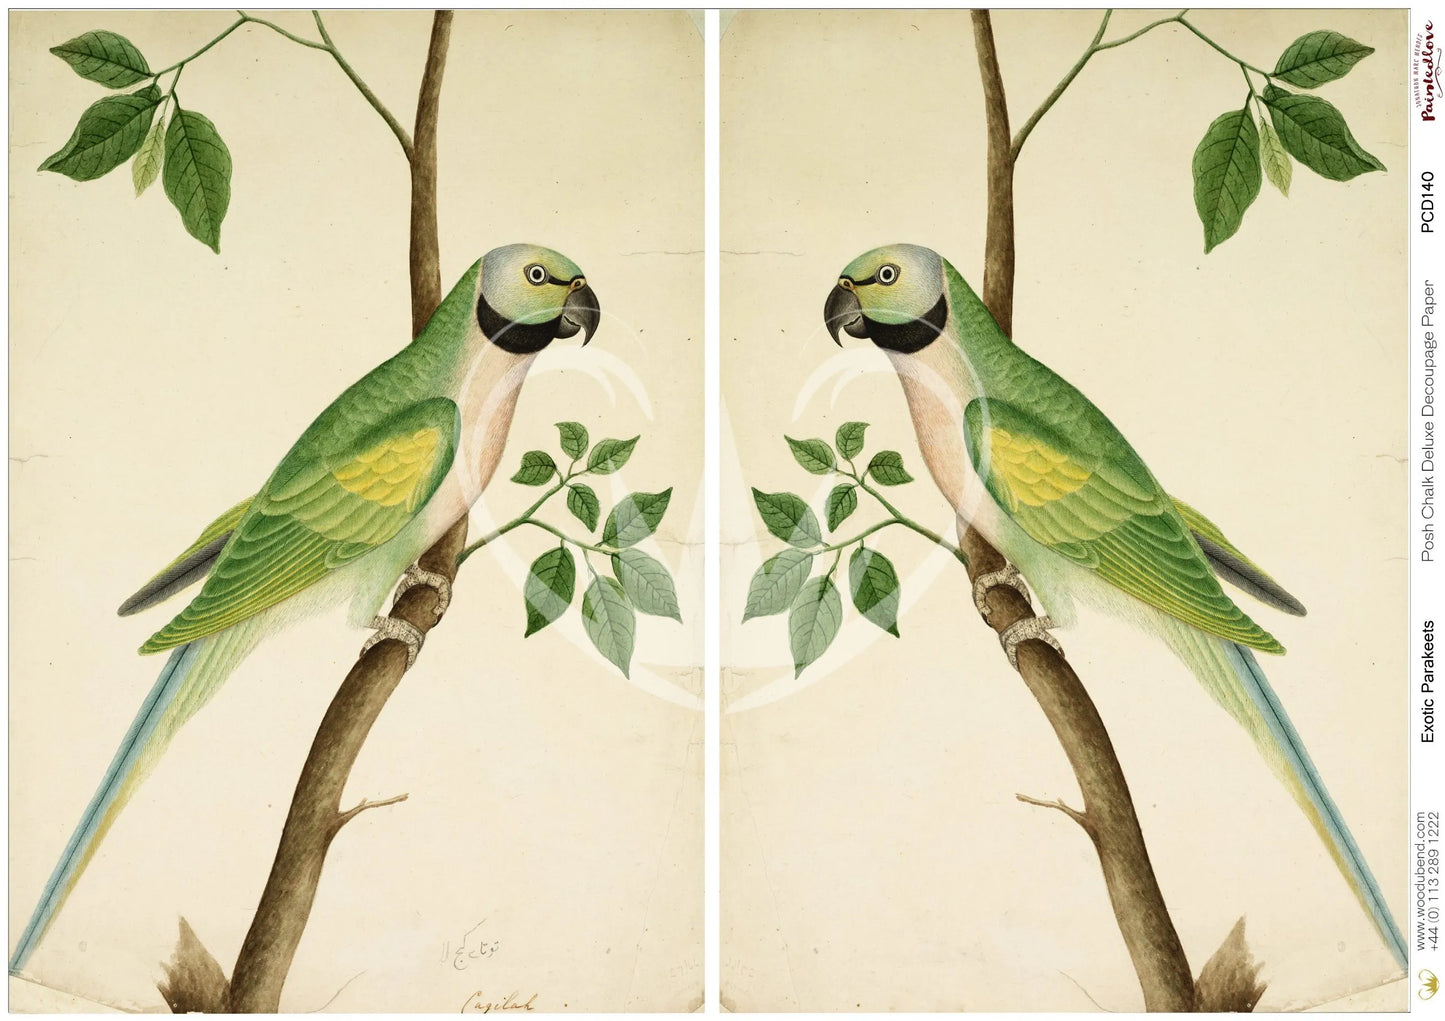 Exotic Parakeets A1 Posh Chalk Deluxe Decoupage from The House of Mendes